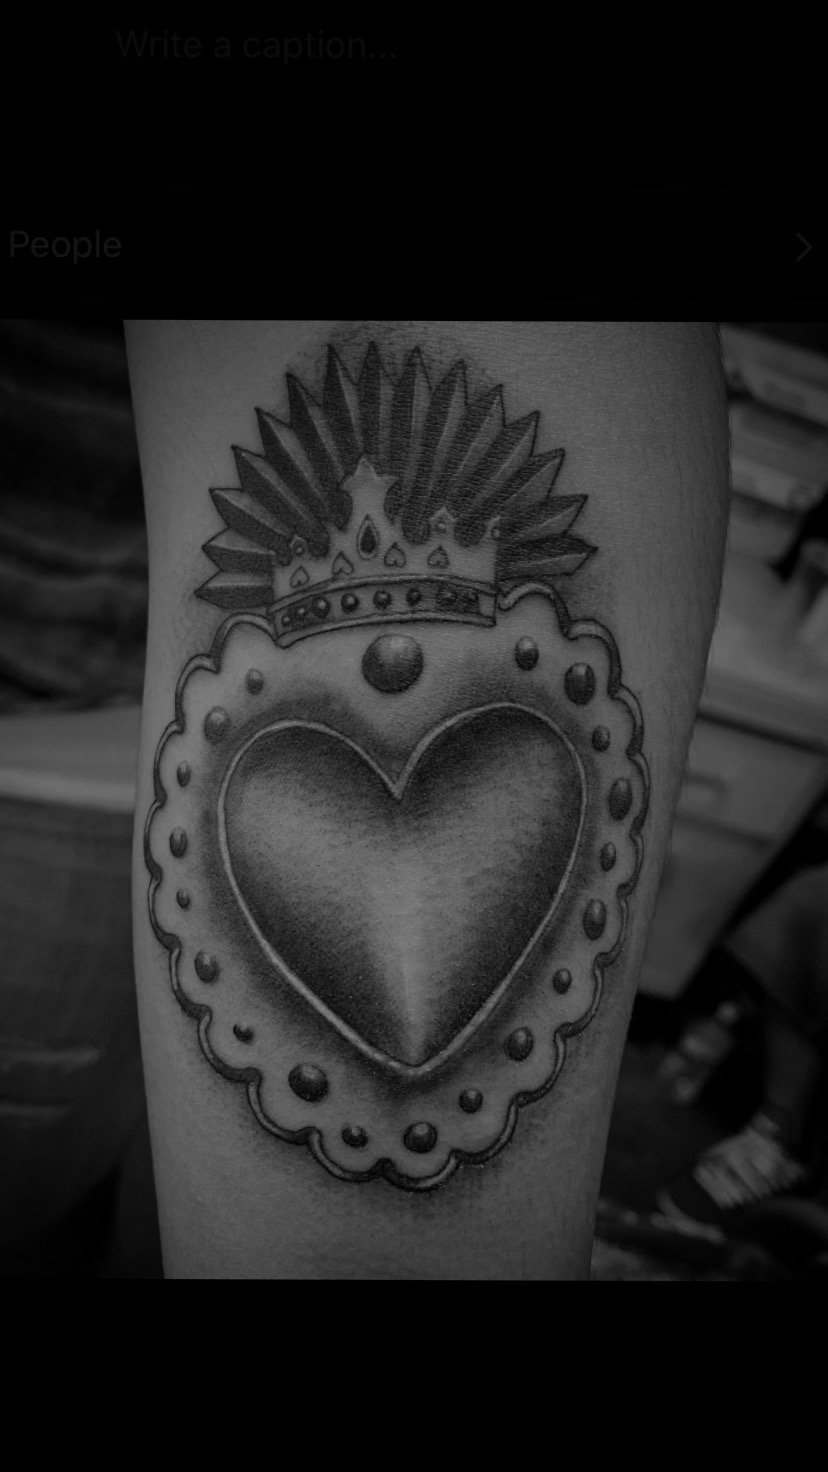 Heart, Crown, and Rays